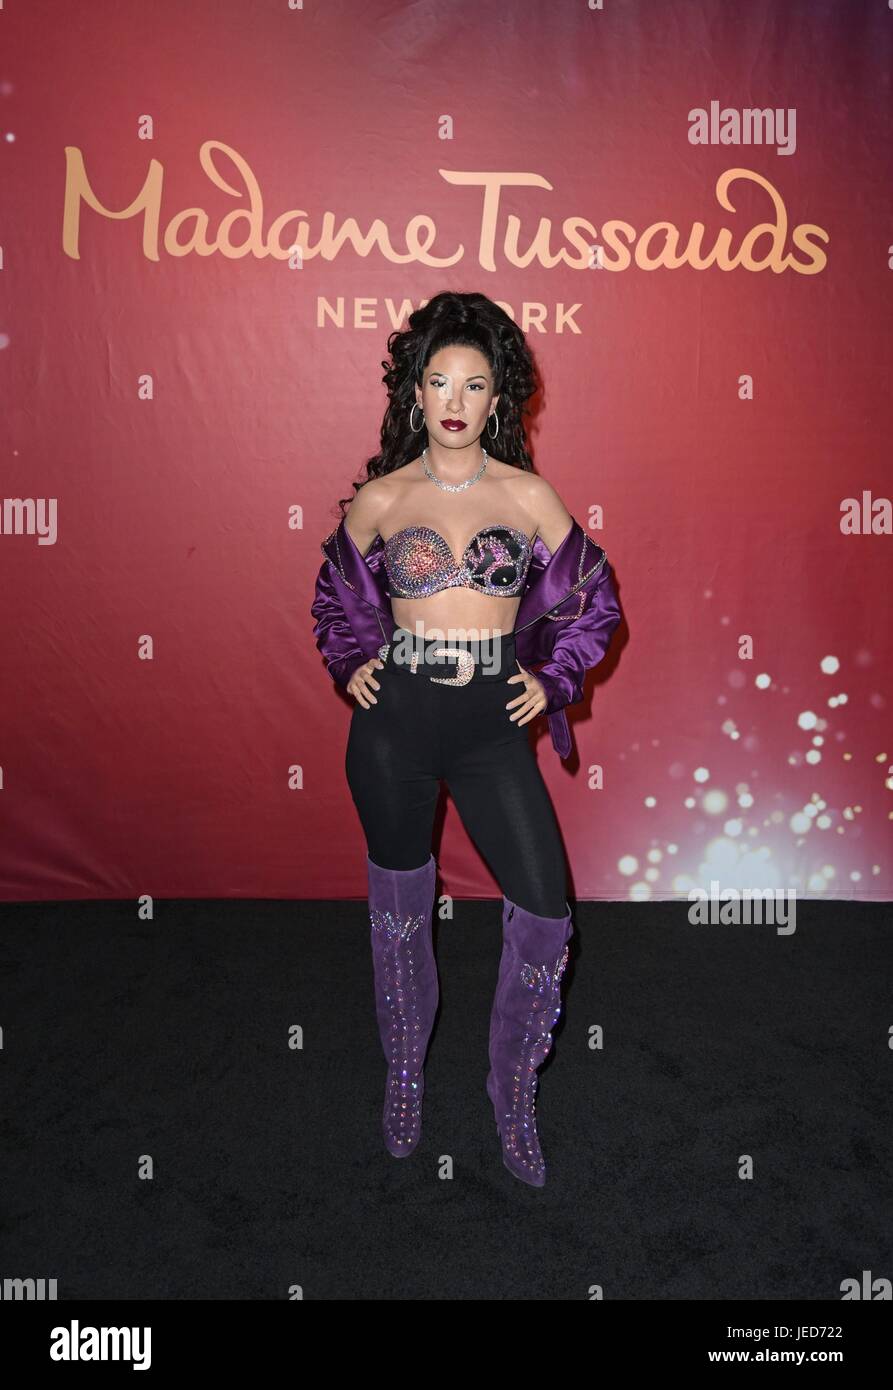 New York, NY, USA. 23rd June, 2017. Selena Quintanilla in attendance for Madame Tussauds New York Unveils Selena Quintanilla's Wax Figure to Launch, Madame Tussauds, New York, NY June 23, 2017. Credit: Derek Storm/Everett Collection/Alamy Live News Stock Photo